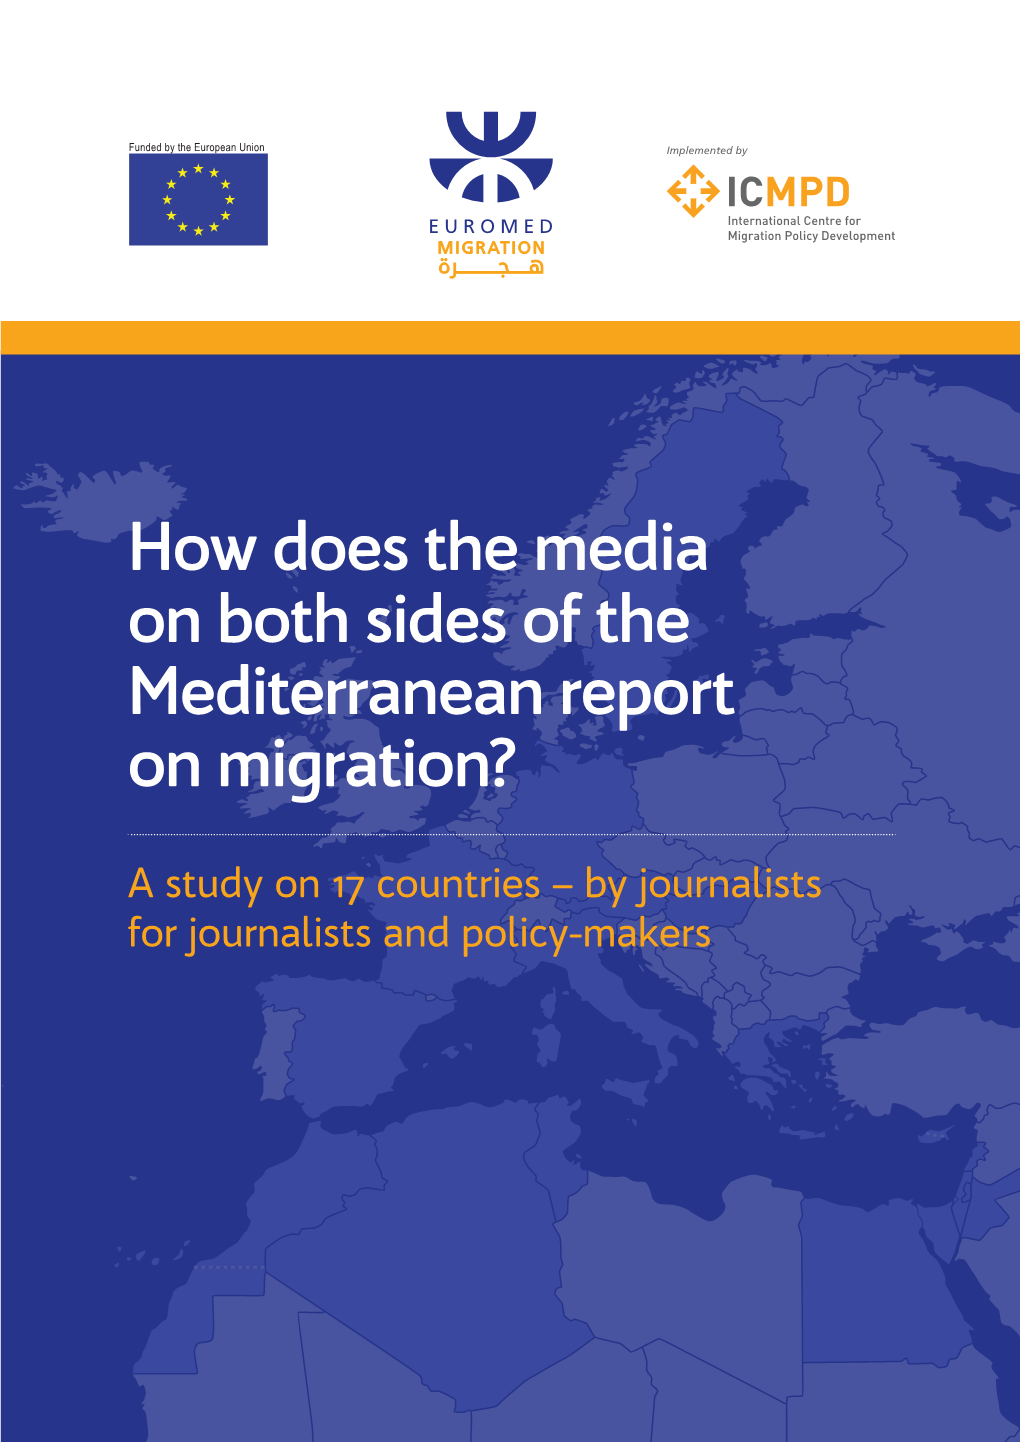 How Does the Media on Both Sides of the Mediterranean Report on Migration?